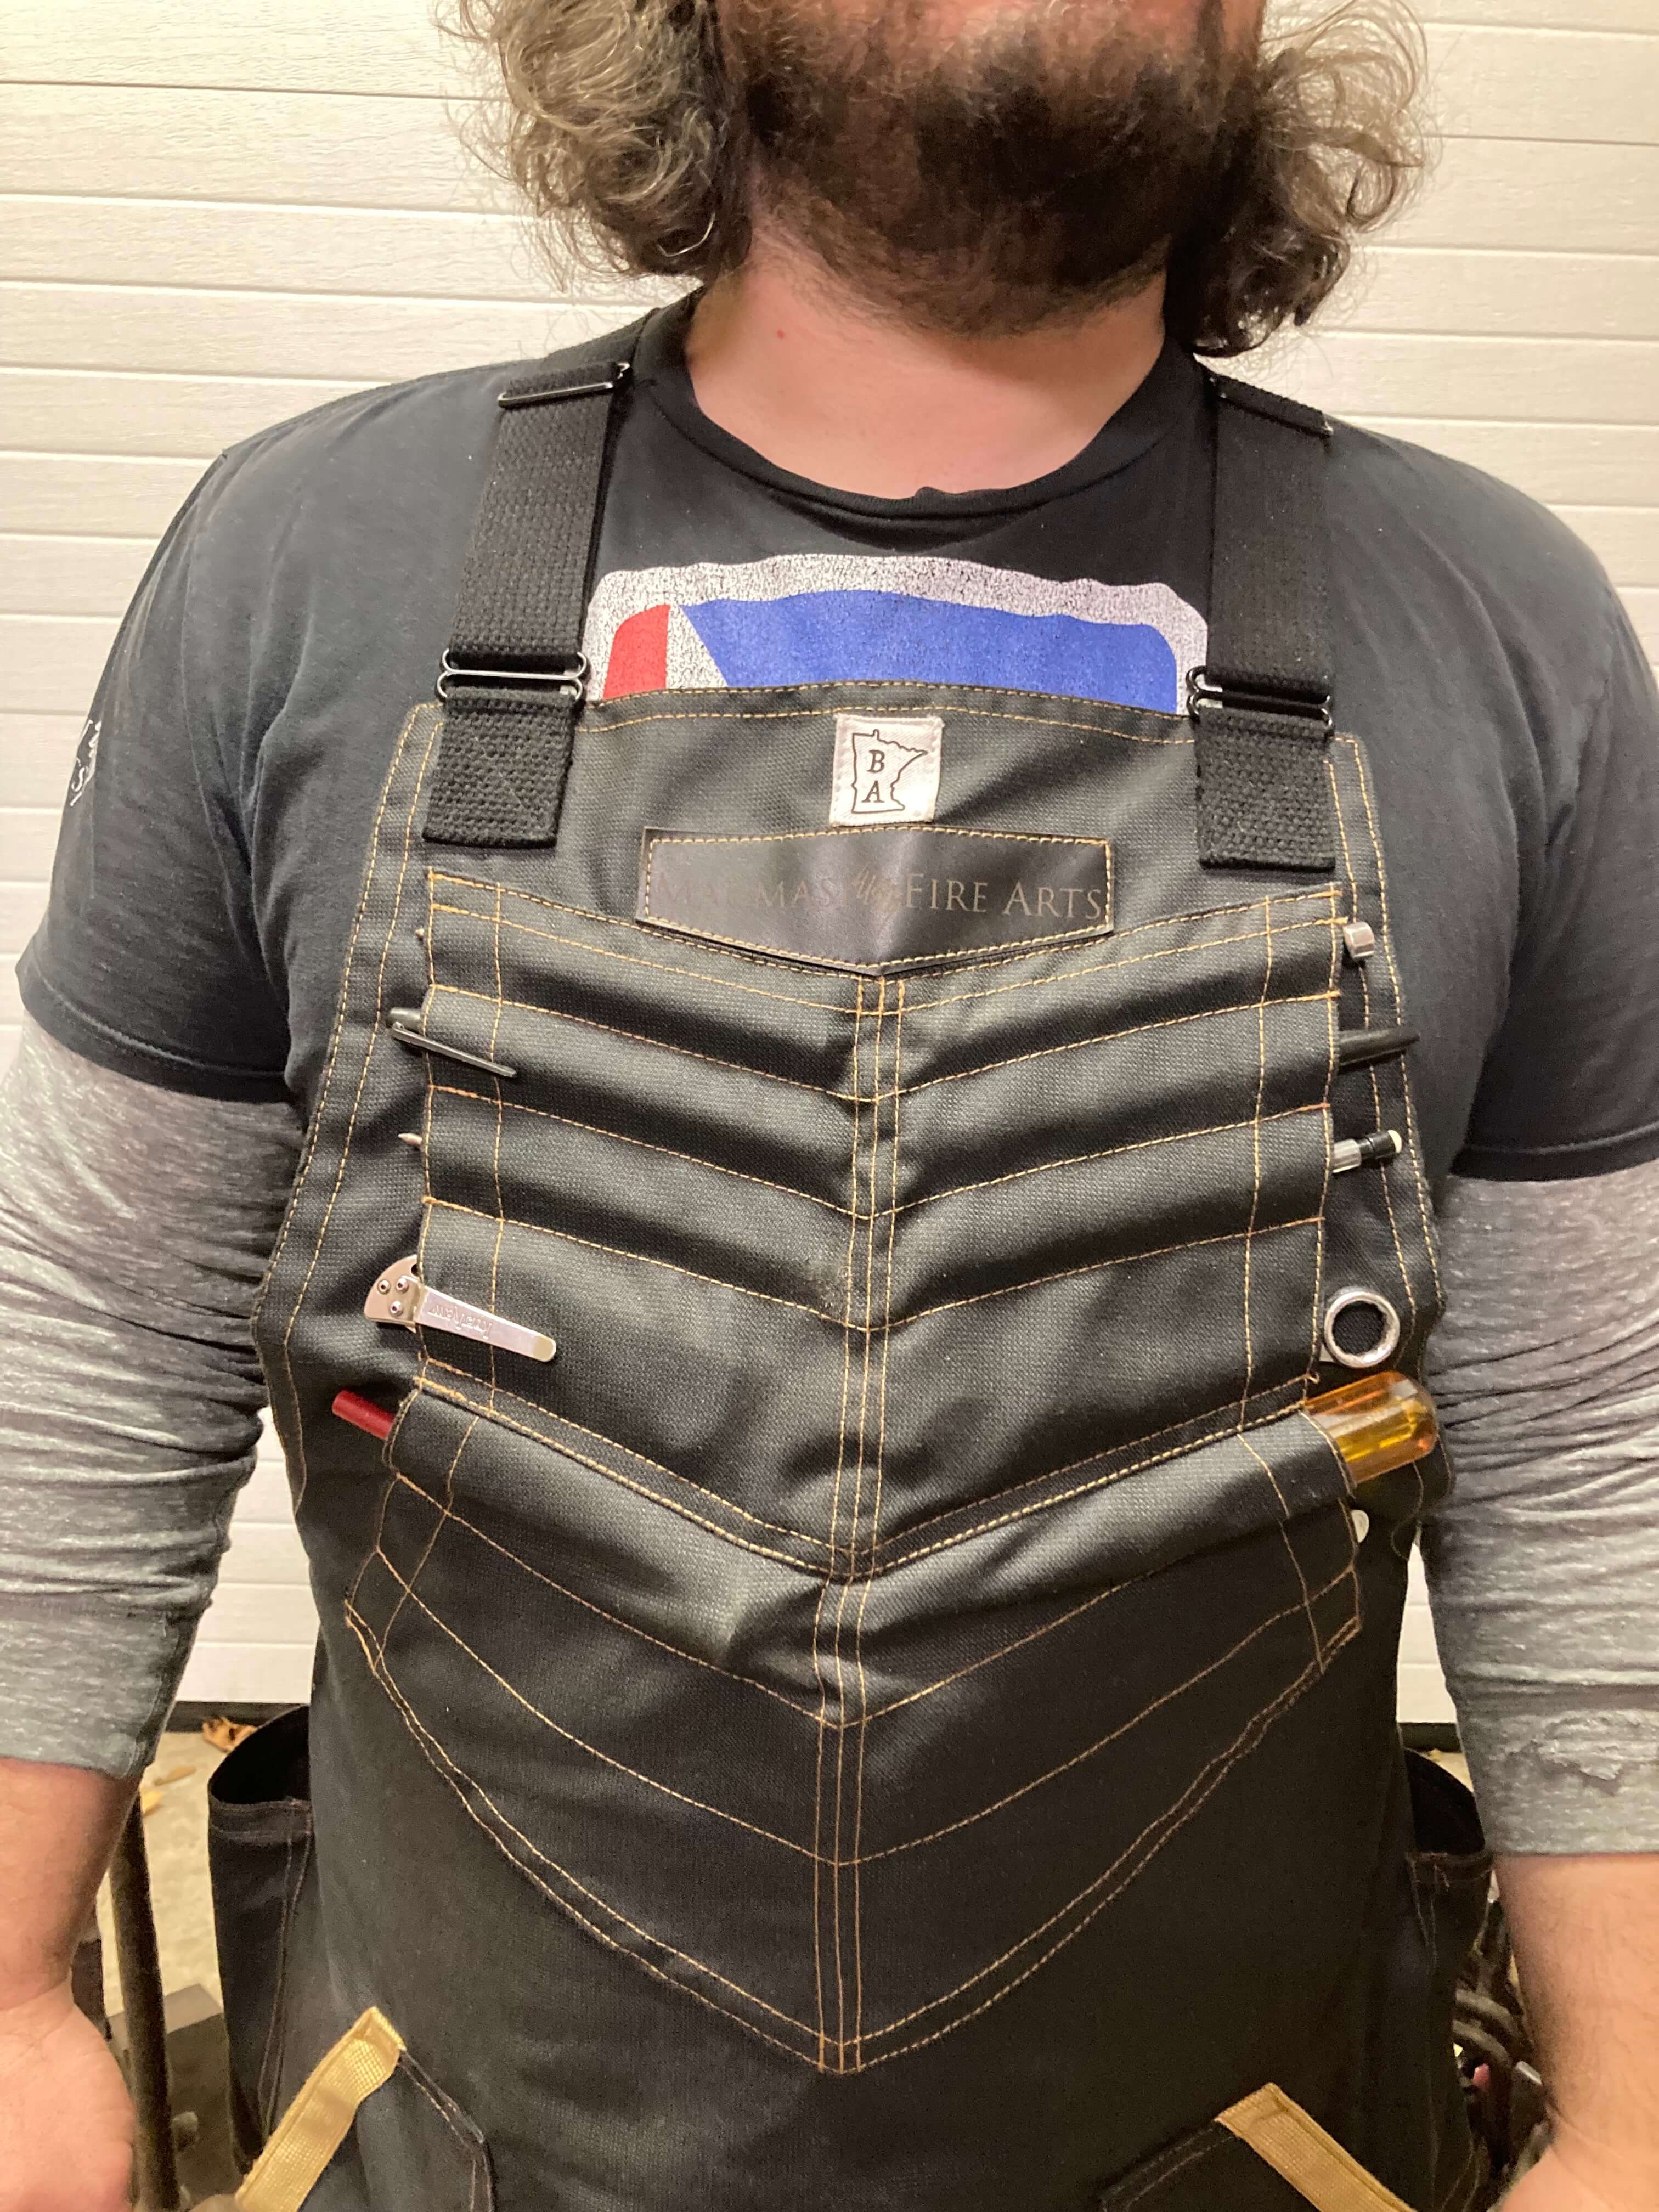 Image of Mareko Maumasi modelling the BAMF apron, with emphasis on the apron's upper tool pockets. The BAMF is a heavy-duty, protective Kevlar apron in black with yellow threading, and the perfect protective apron for knife makers.